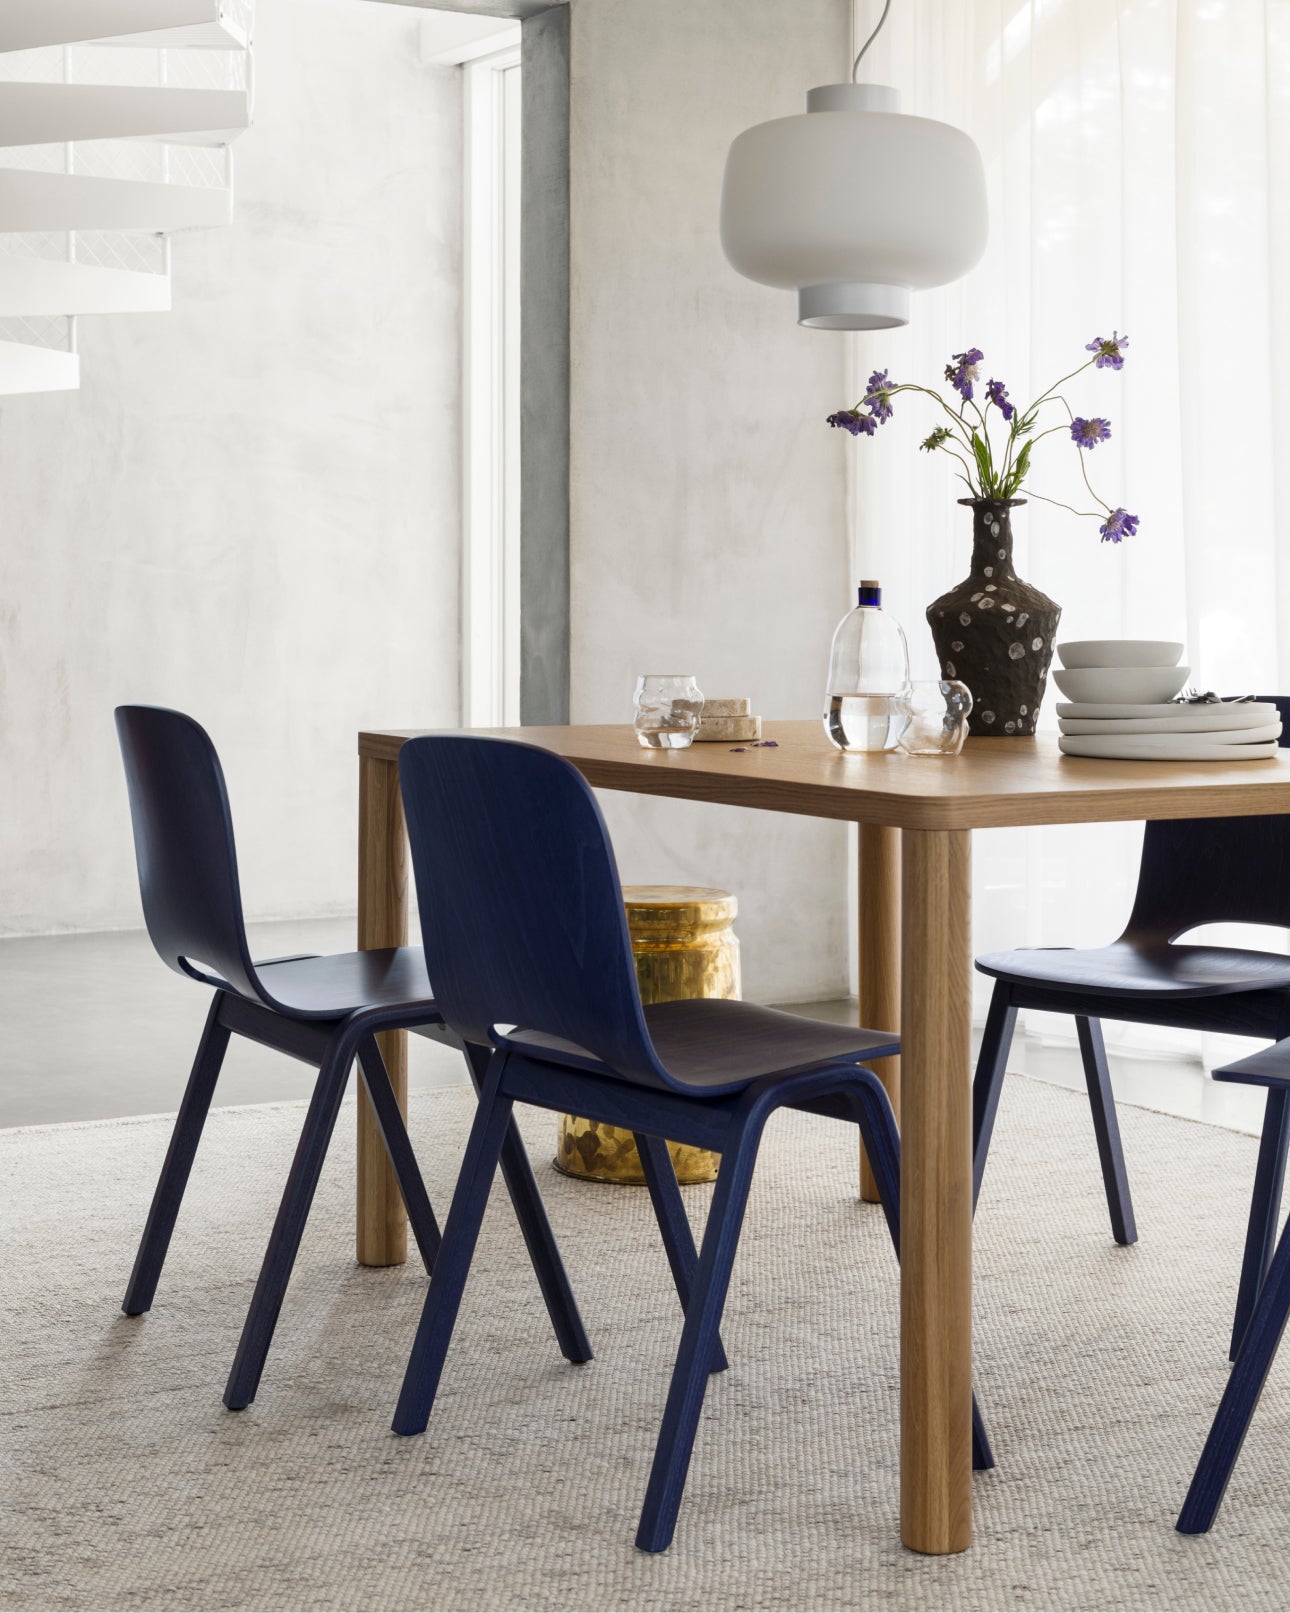 A dining room scene featuring Log Table, Touchwood Chairs in Blue, Dusk Lamp, and a Dune Rug.